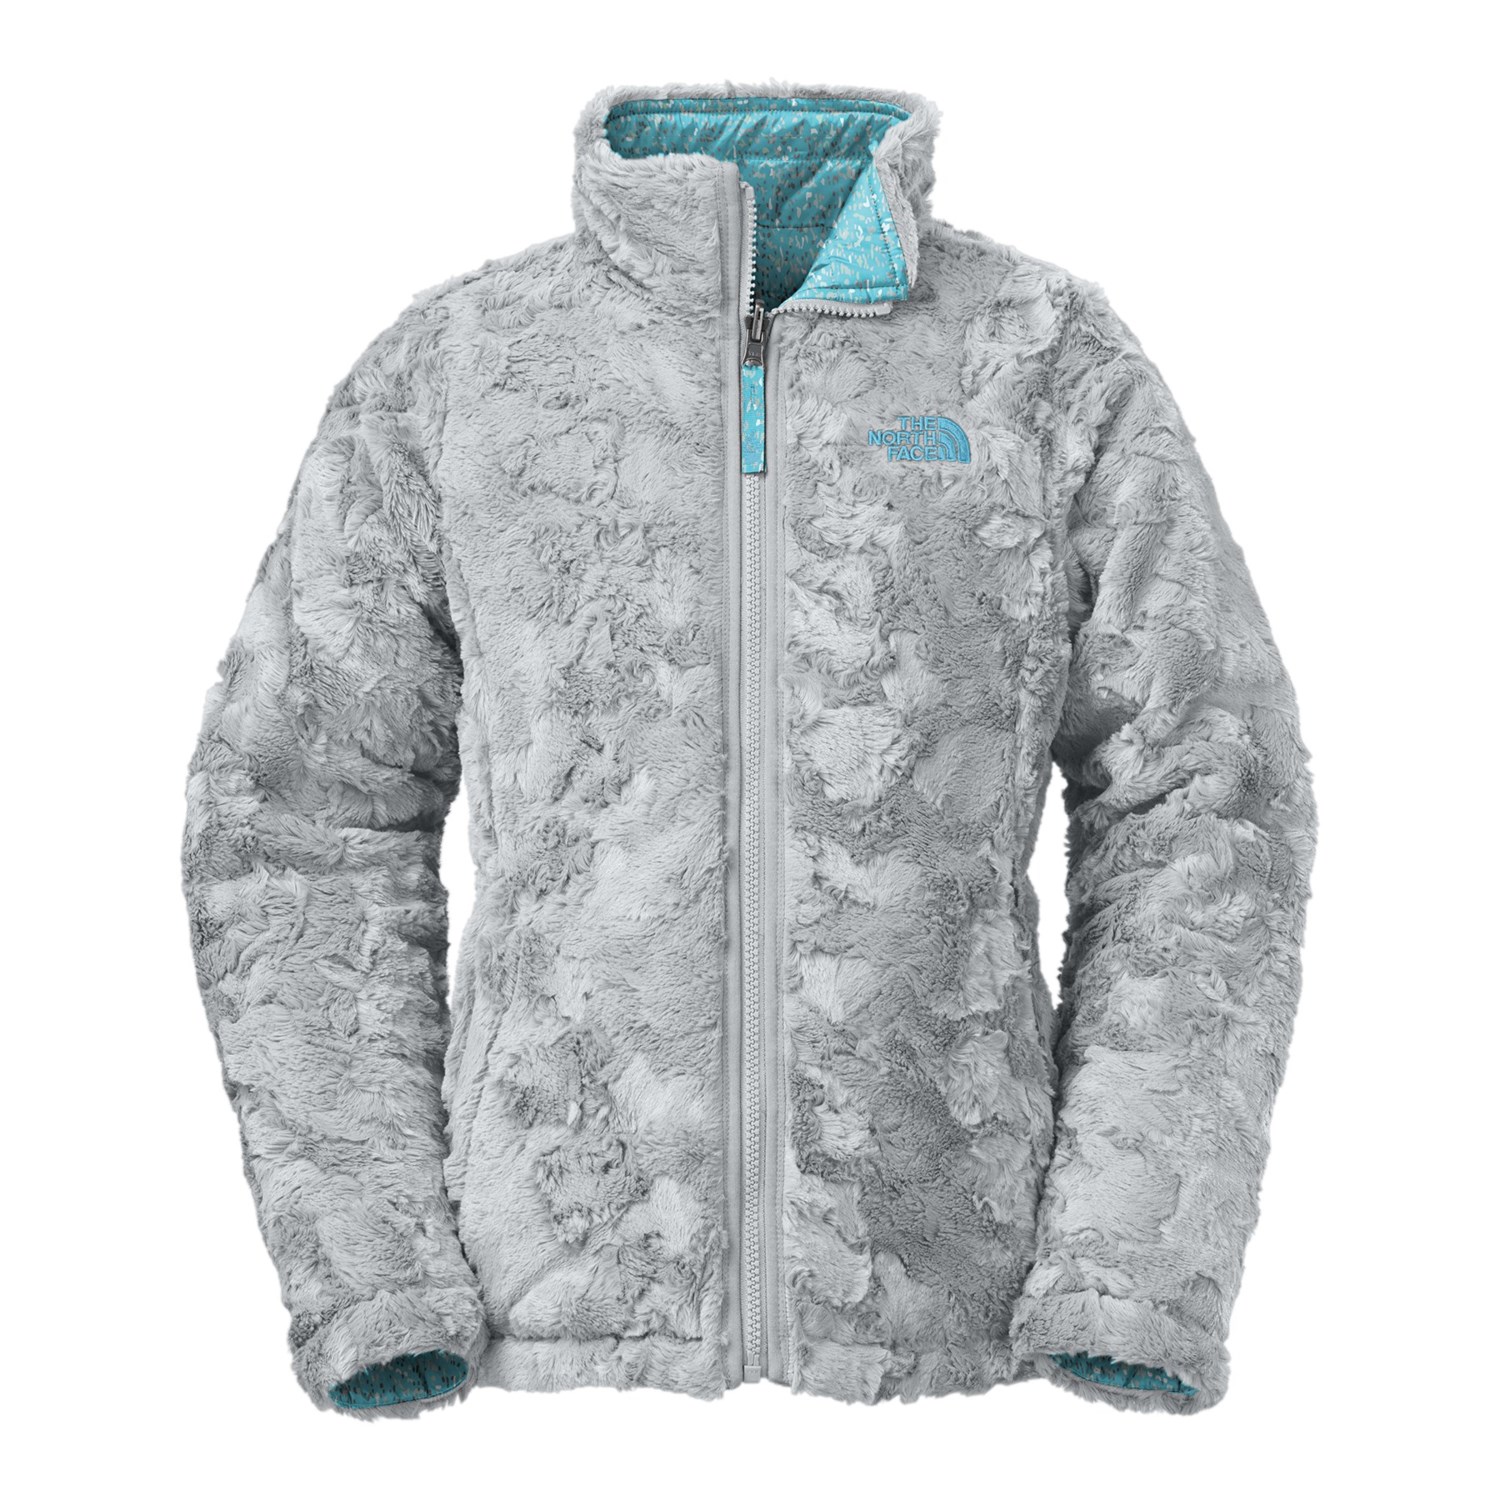 he north face girls' reversible mossbud swirl insulated jacket